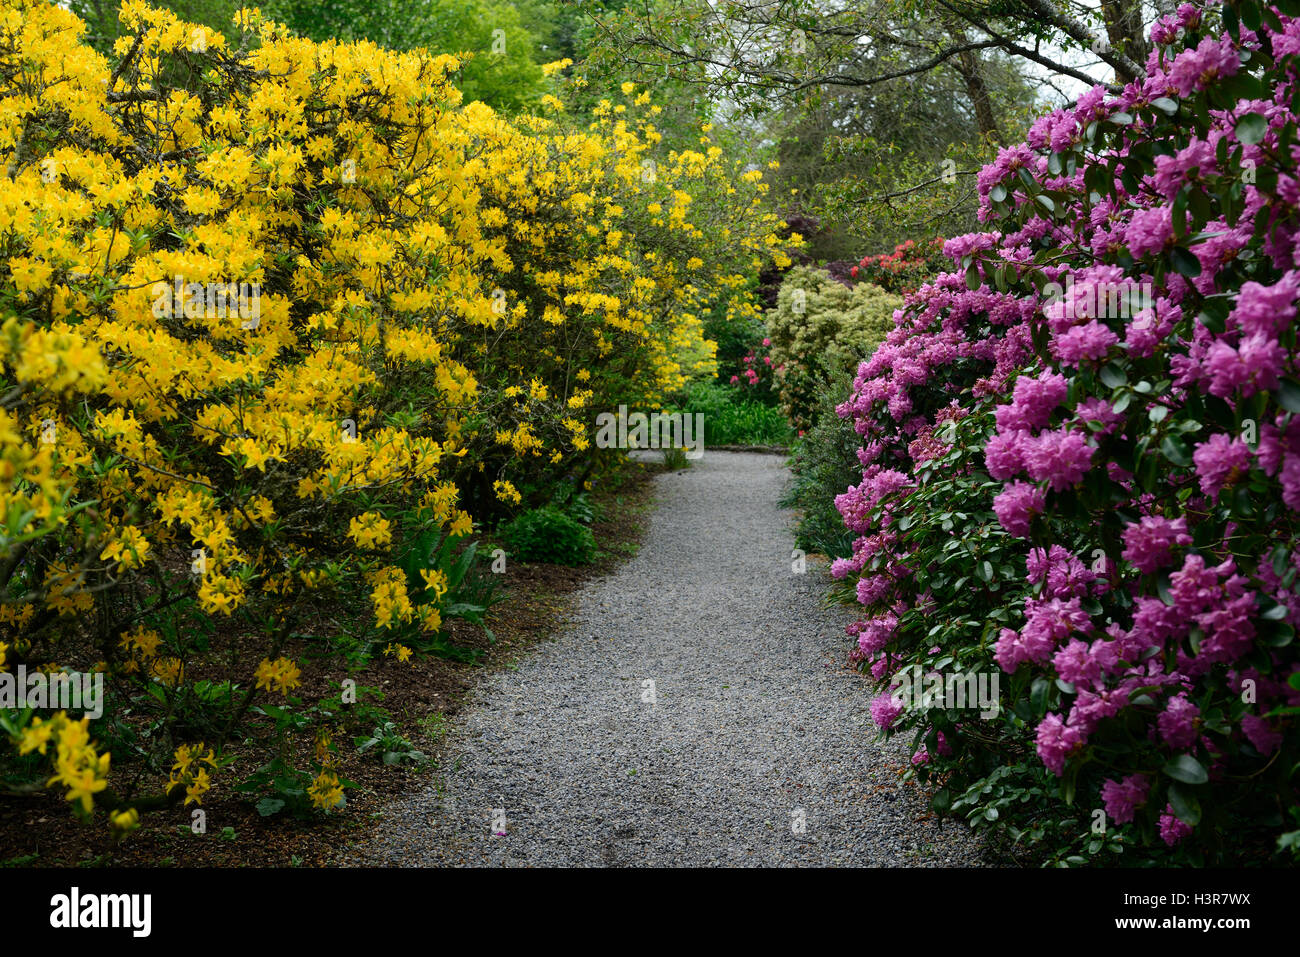 rhododendron pink yellow tree trees shrubs flowers flowering shrub Altamont Gardens Carlow RM Floral Stock Photo